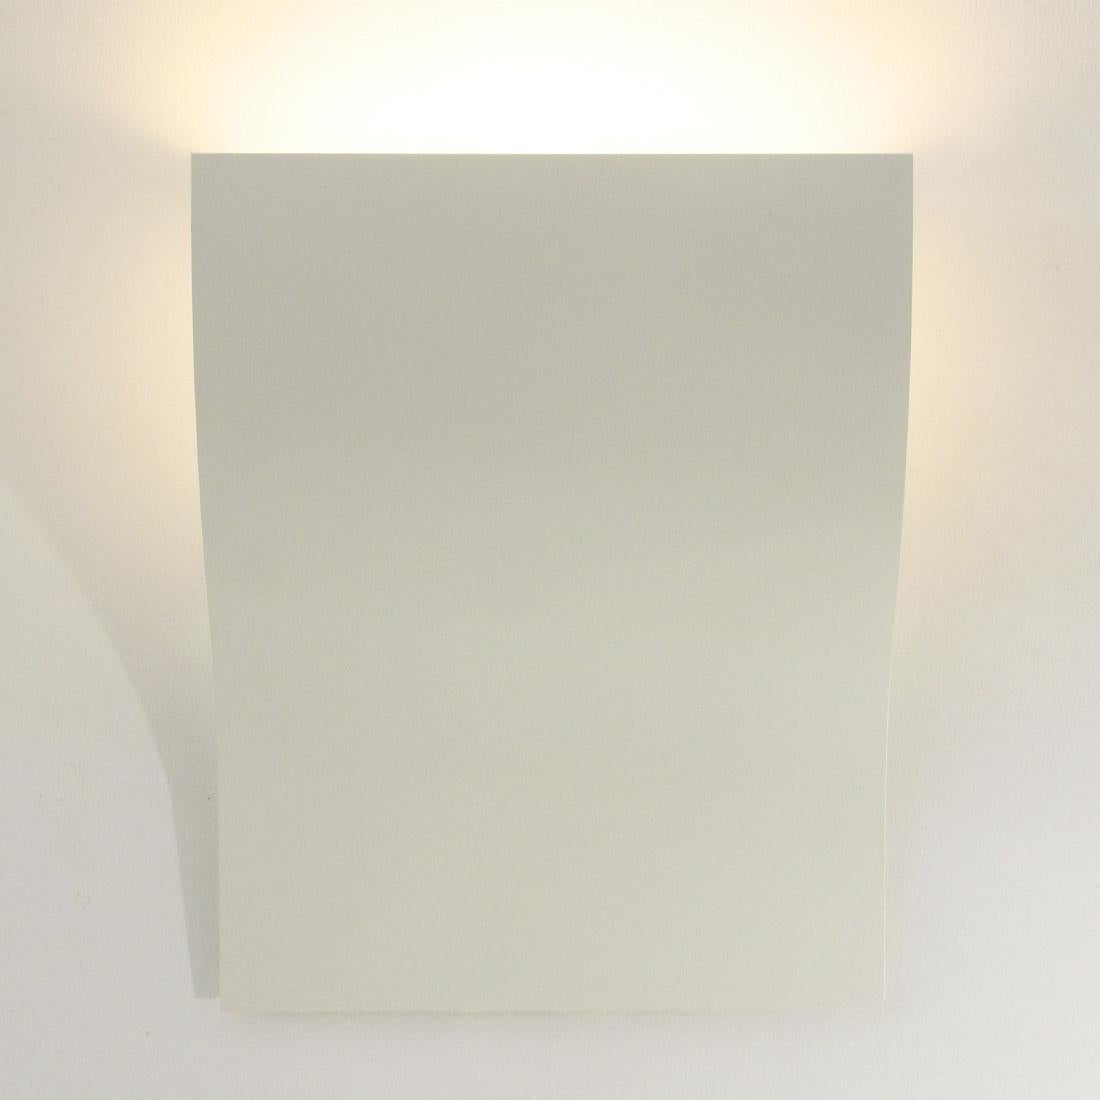 'Moki' wall lamp by Eugenio and Andrea Pamio for Oty Light, 2000s For Sale 1